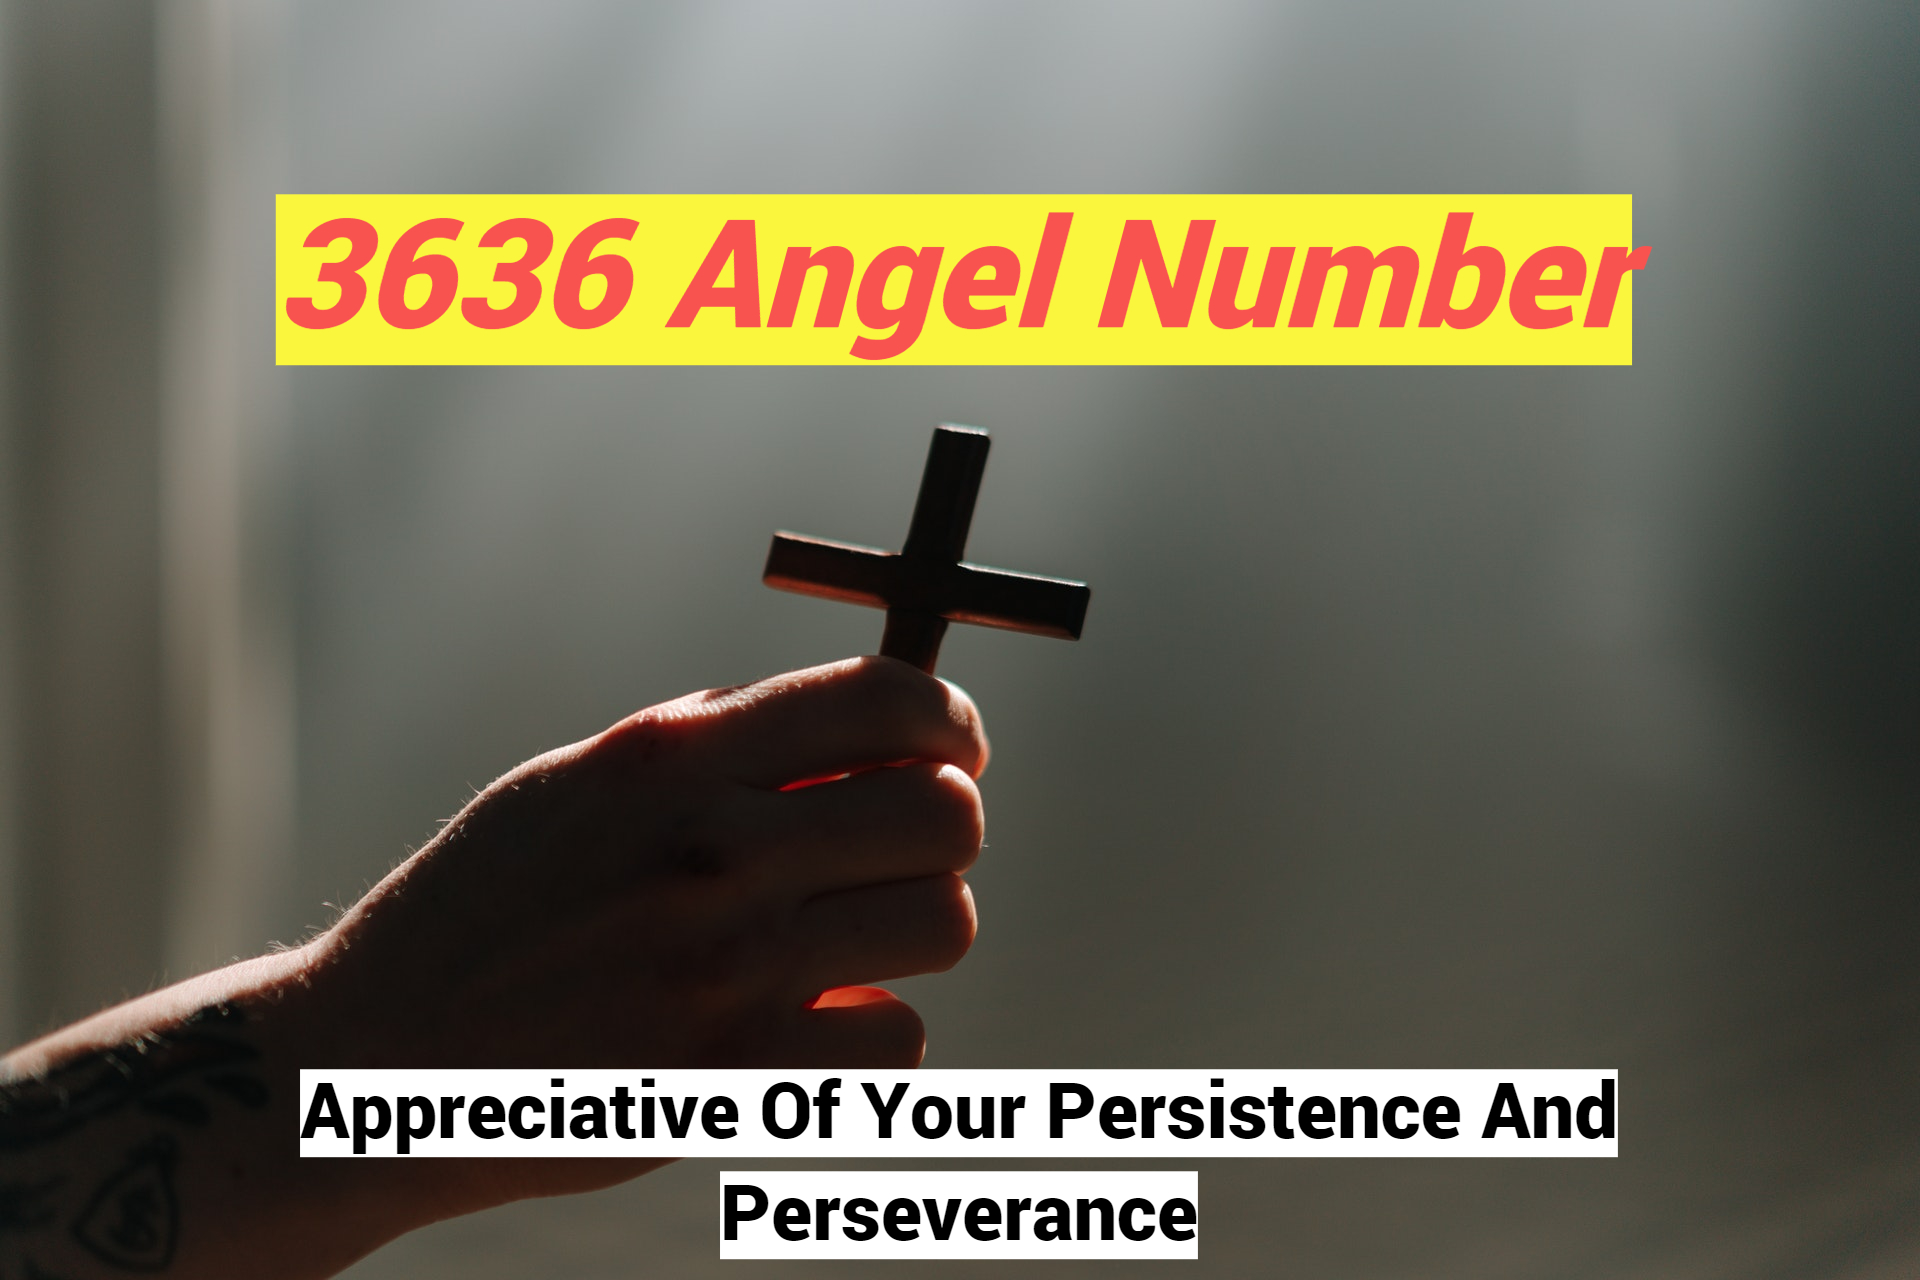 3636 Angel Number Indication Of Happy, Accessible, And Peaceful Life